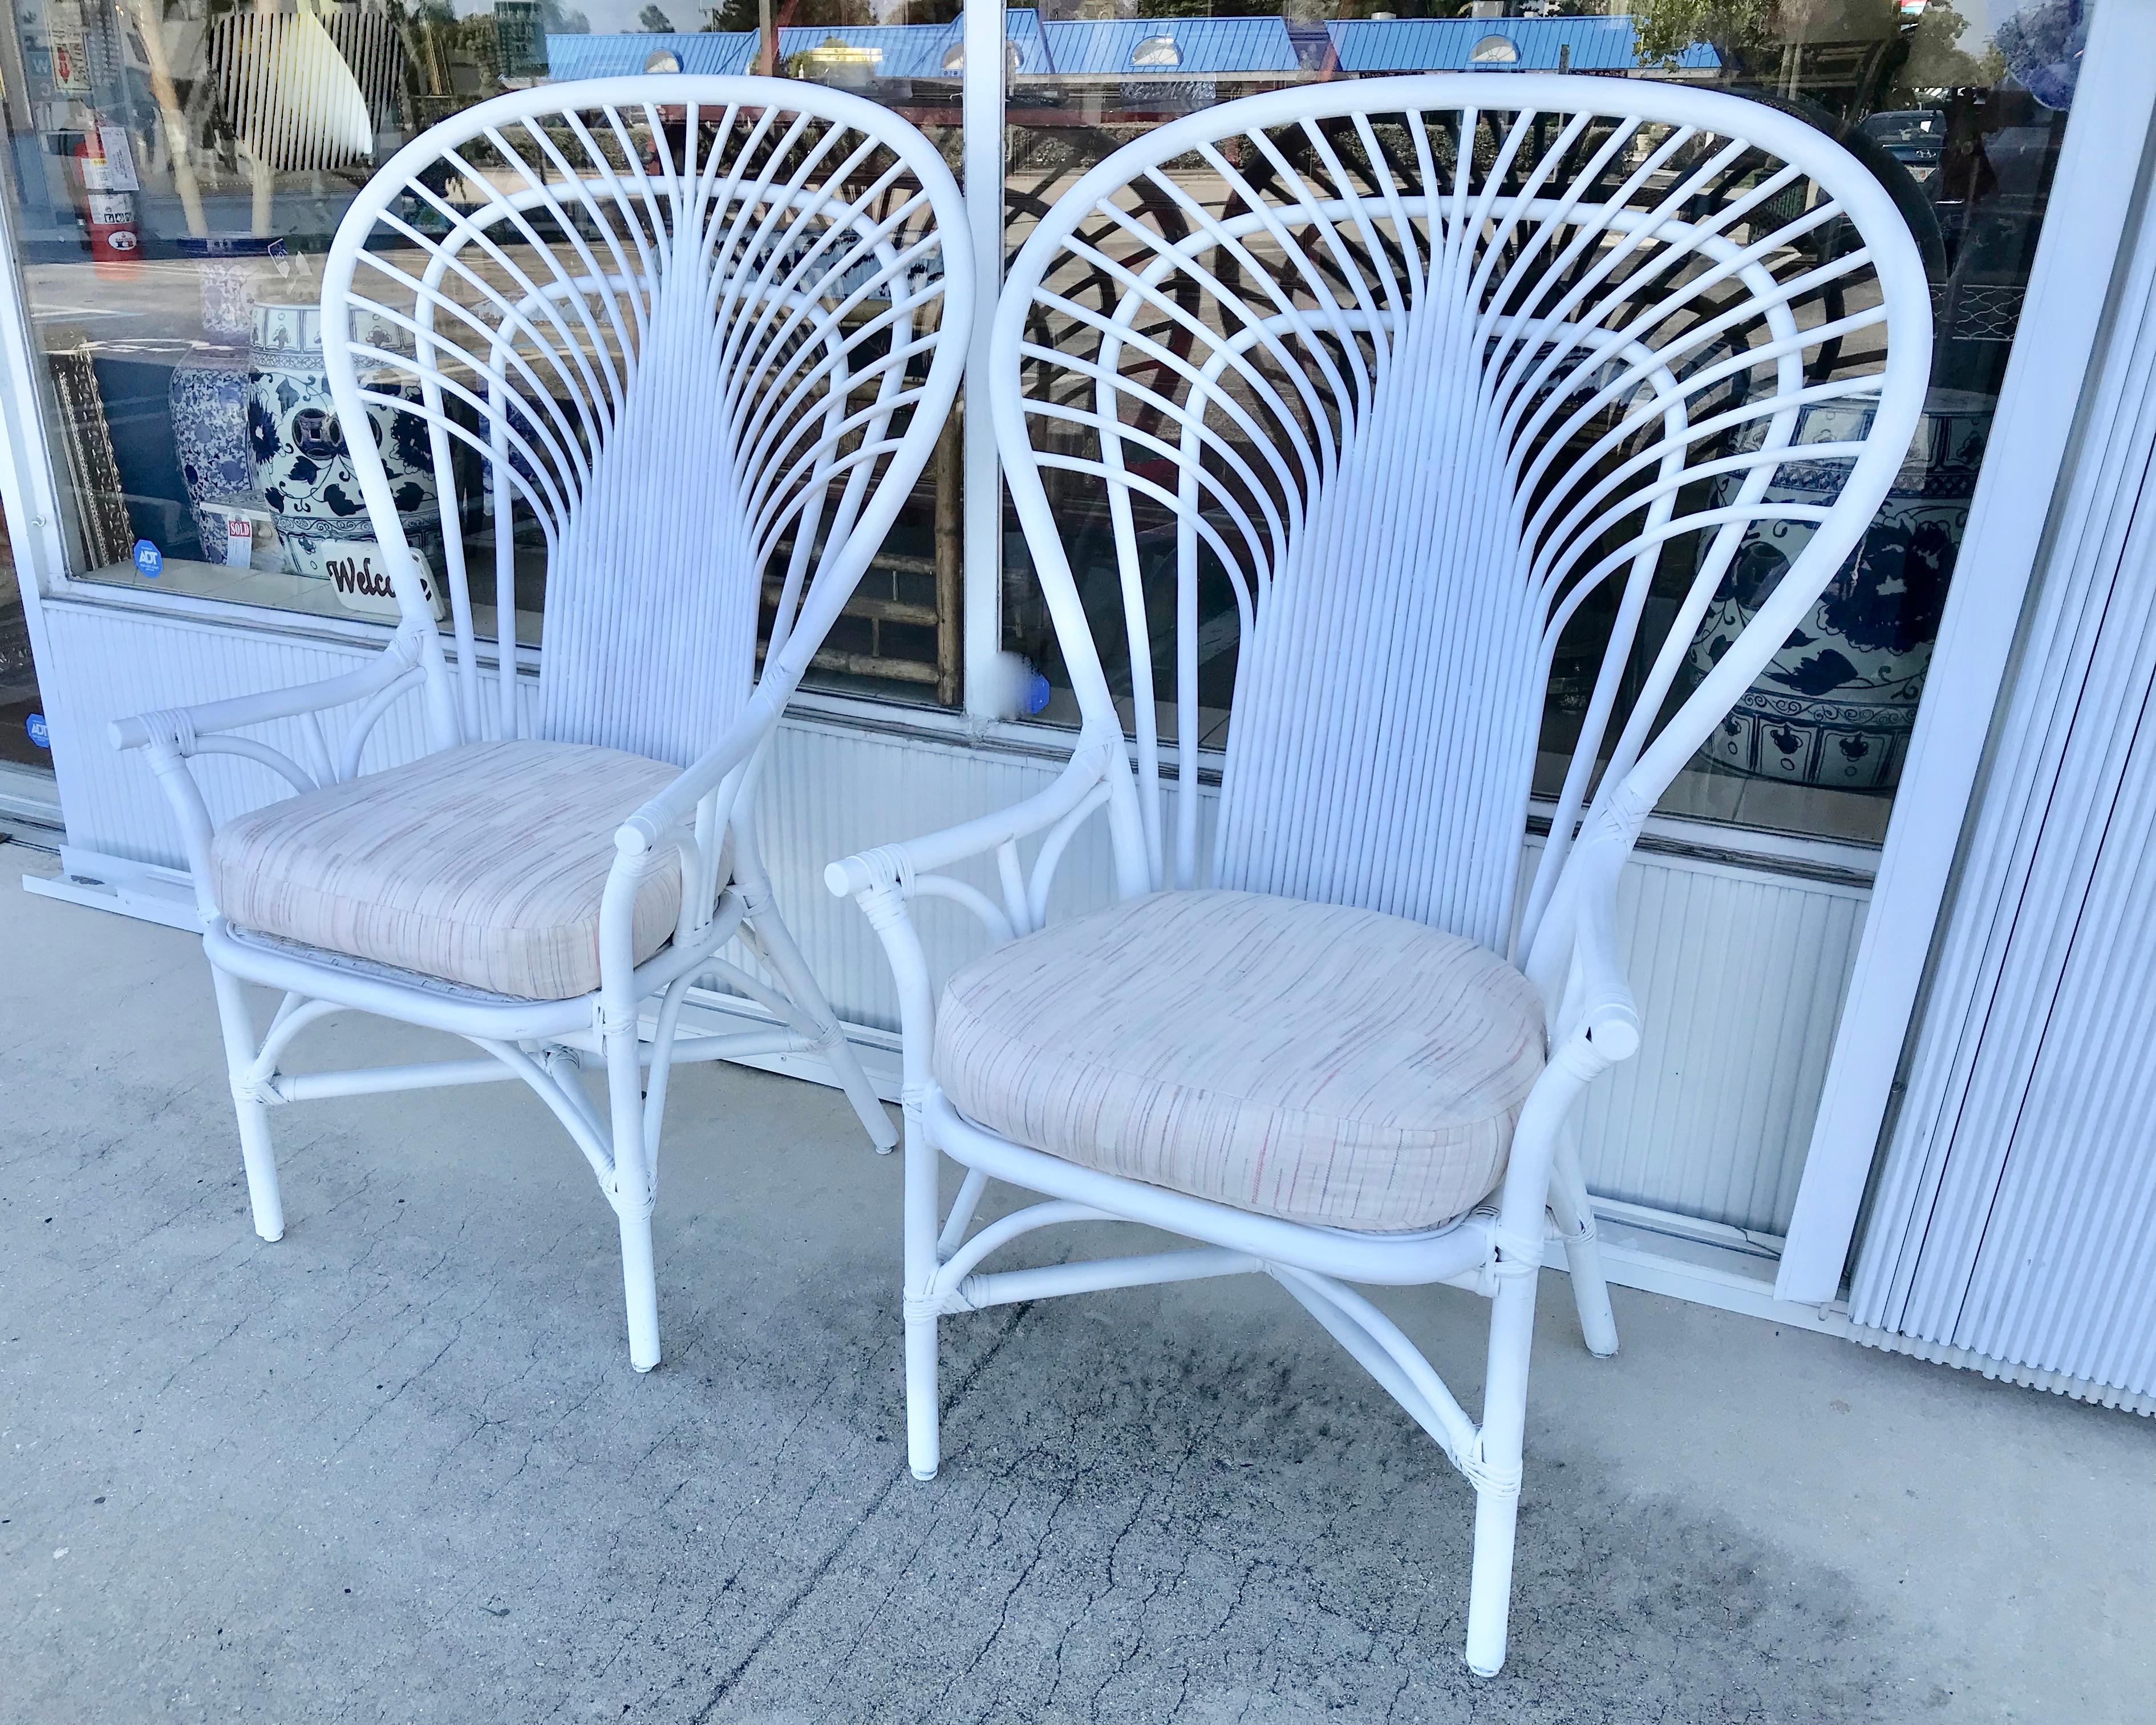 Dramatic in scale and form -unusual design akin to
the Classic peacock chair, but much more durable.
The finish is a satin white. Height of seats without
cushions is 17.25